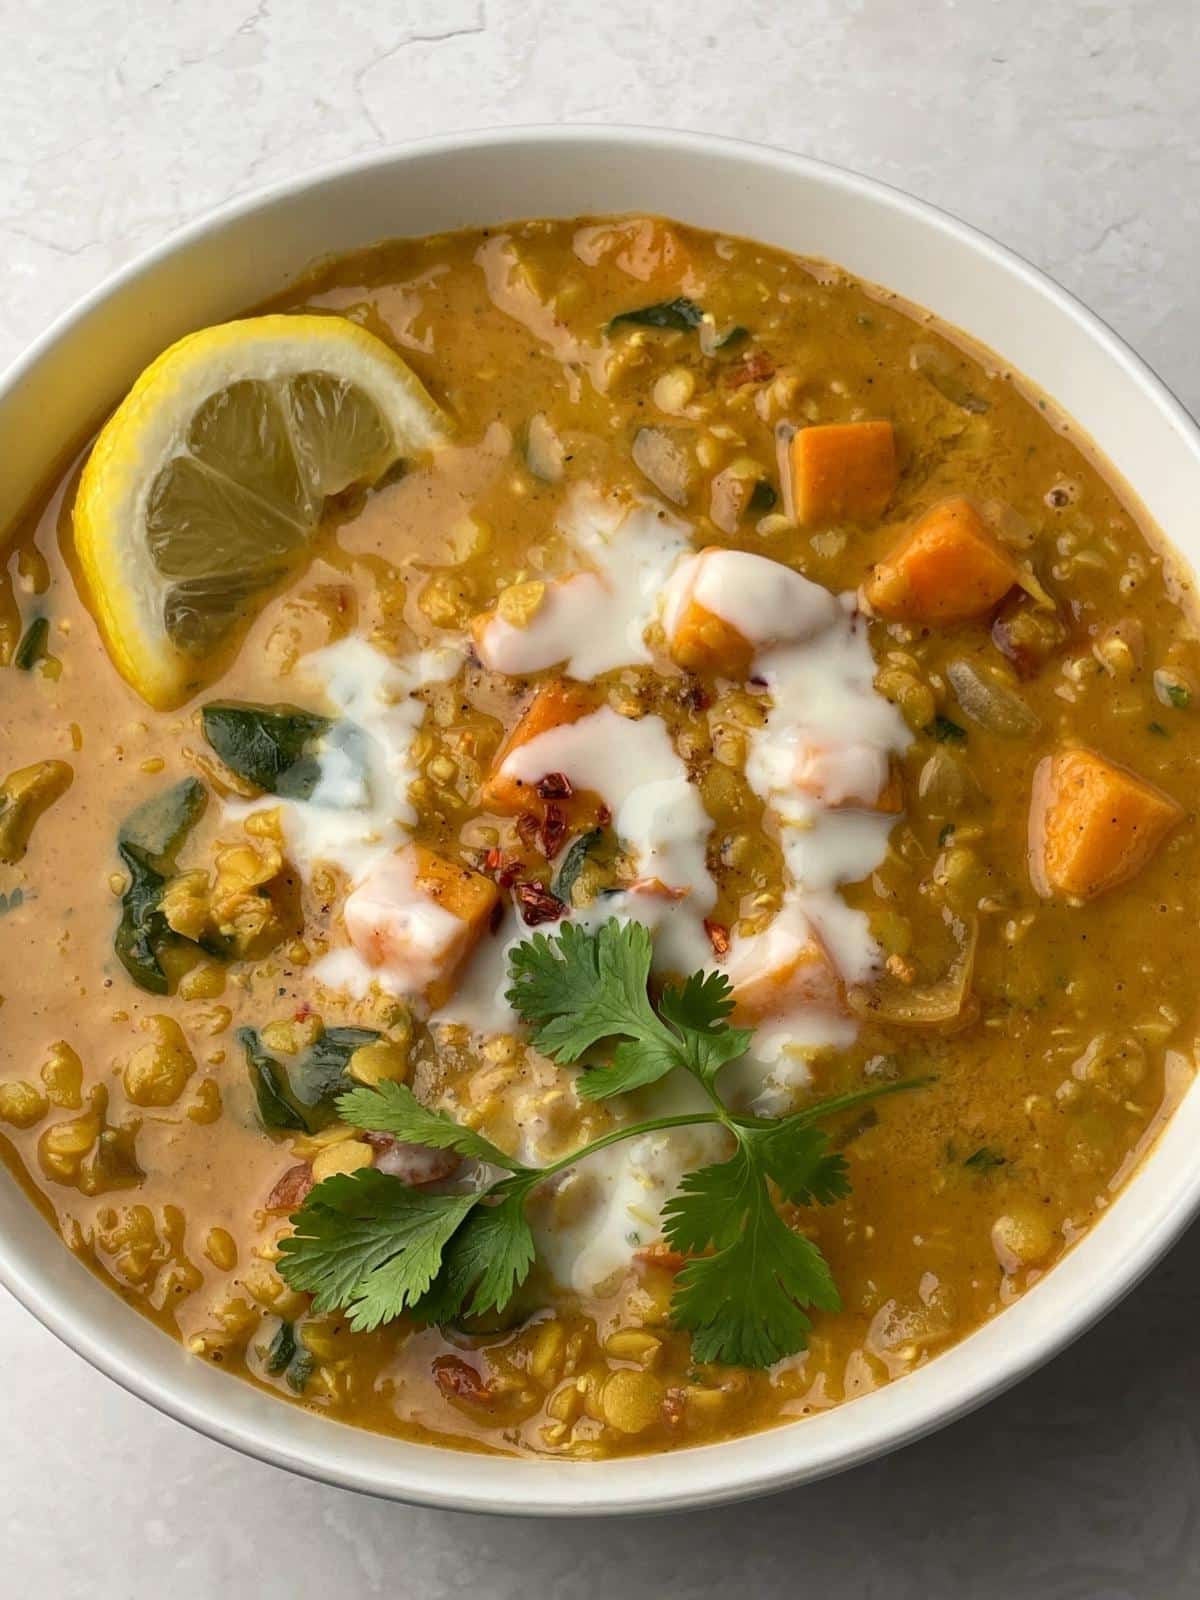 Red curry lentils garnished with lemon and red pepper.